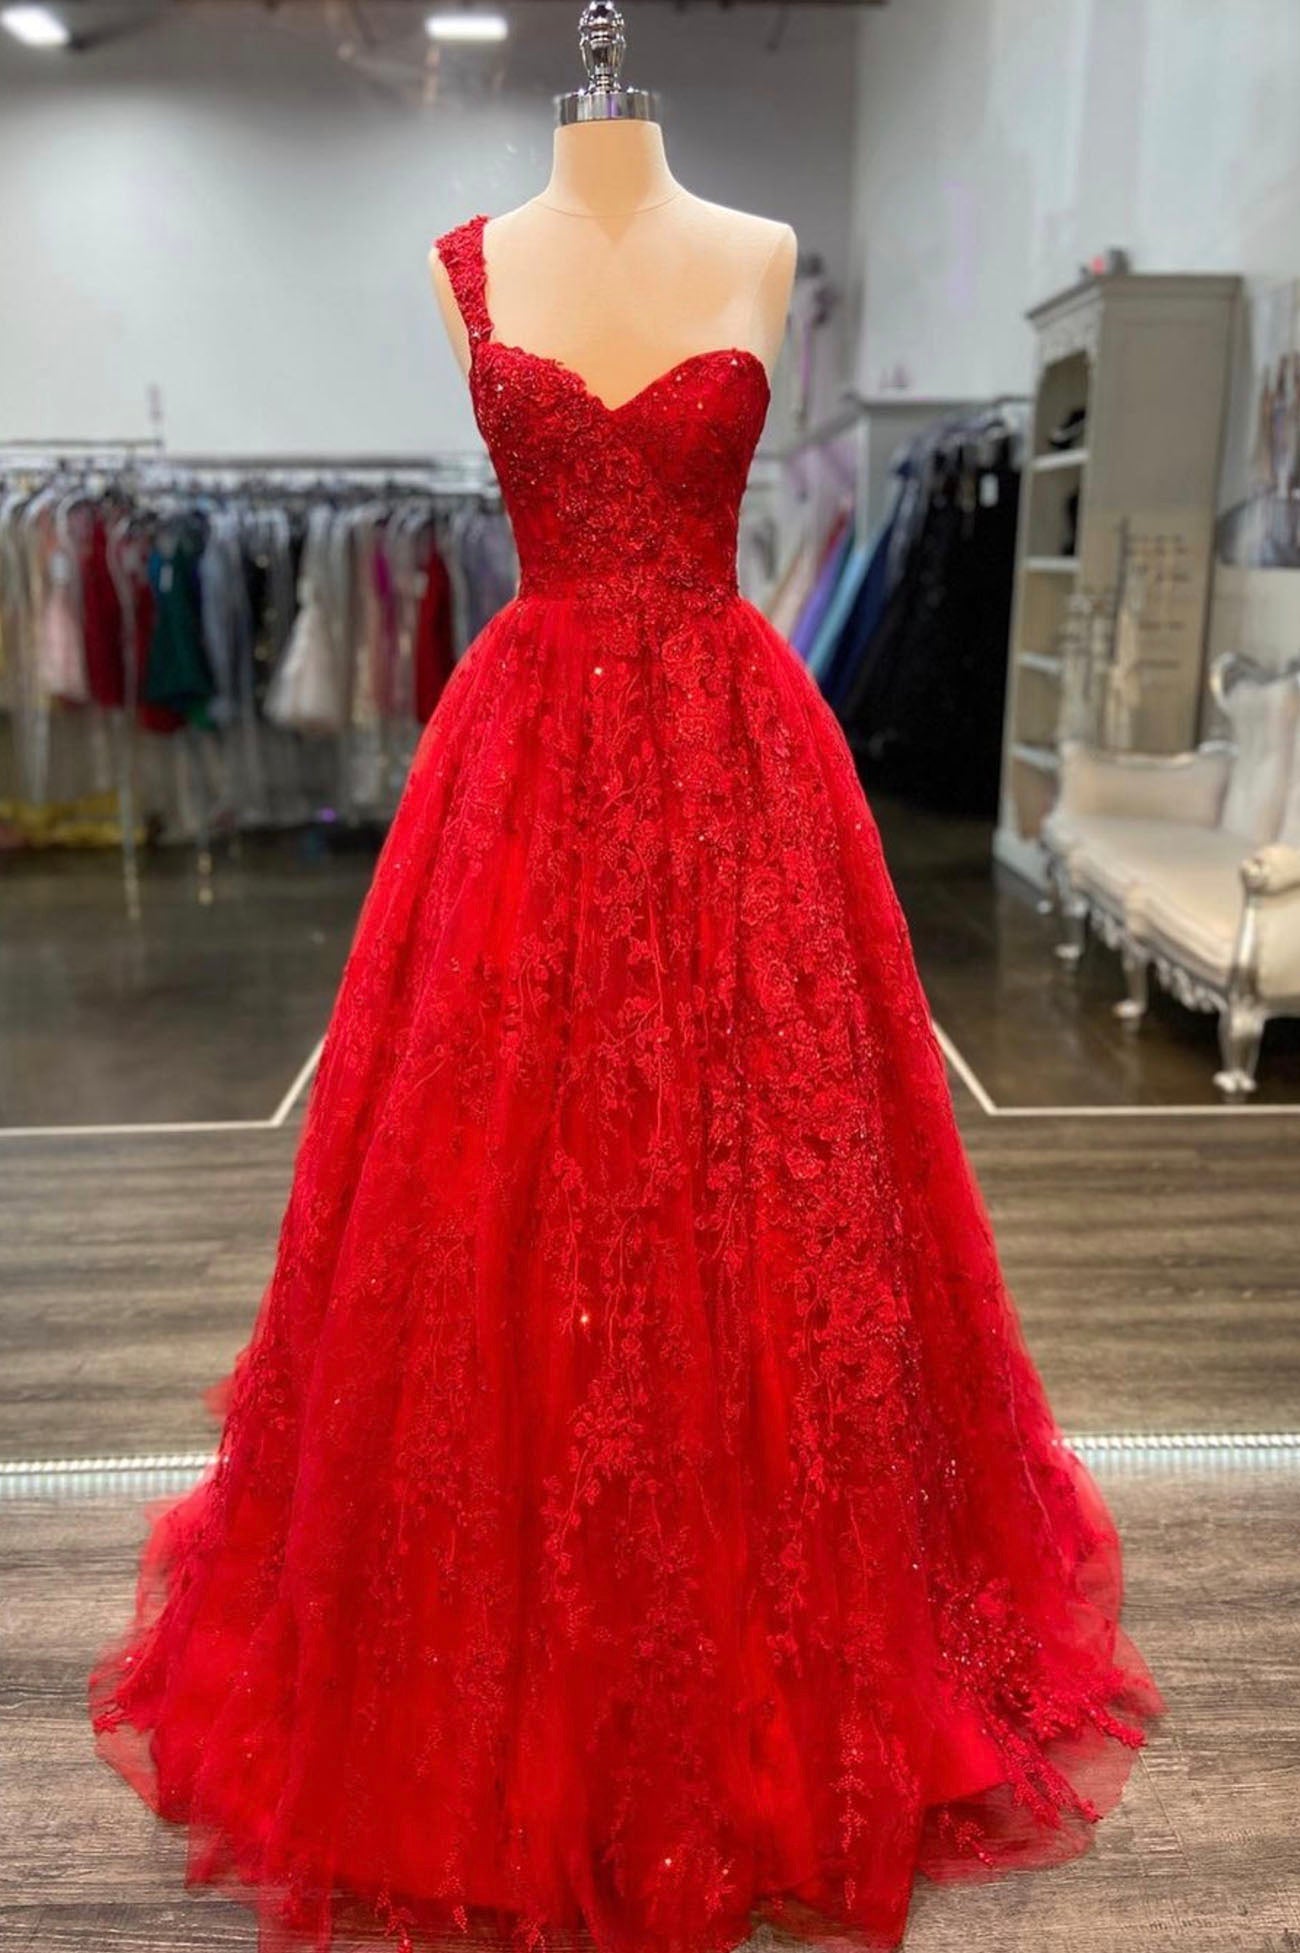 Red Lace Long A-Line Prom Dress Outfits For Girls, One Shoulder Evening Dress